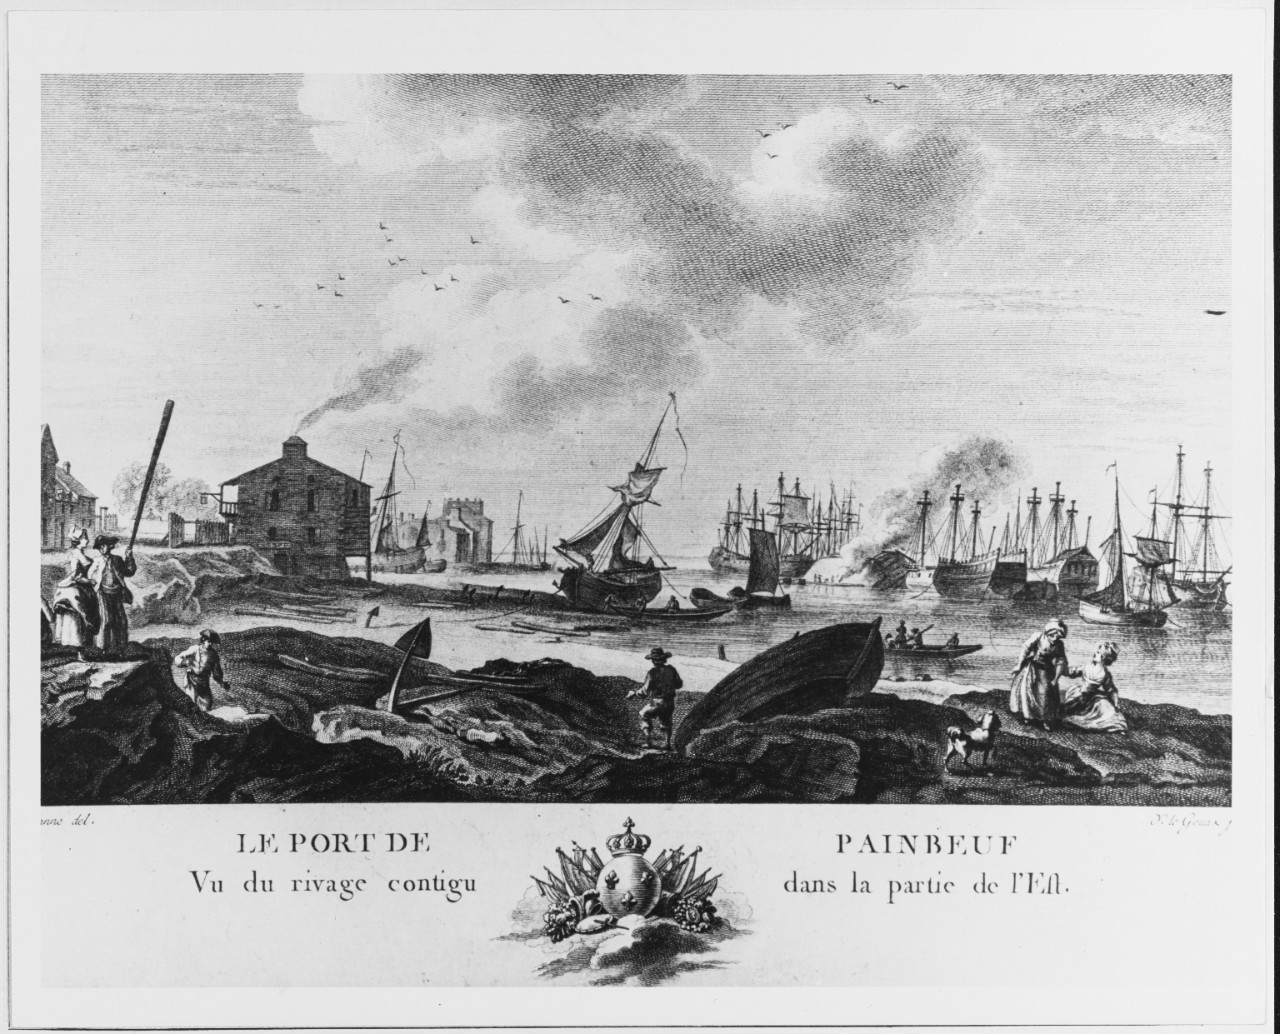 The port of Painbeuf at the time of the American Revolution.